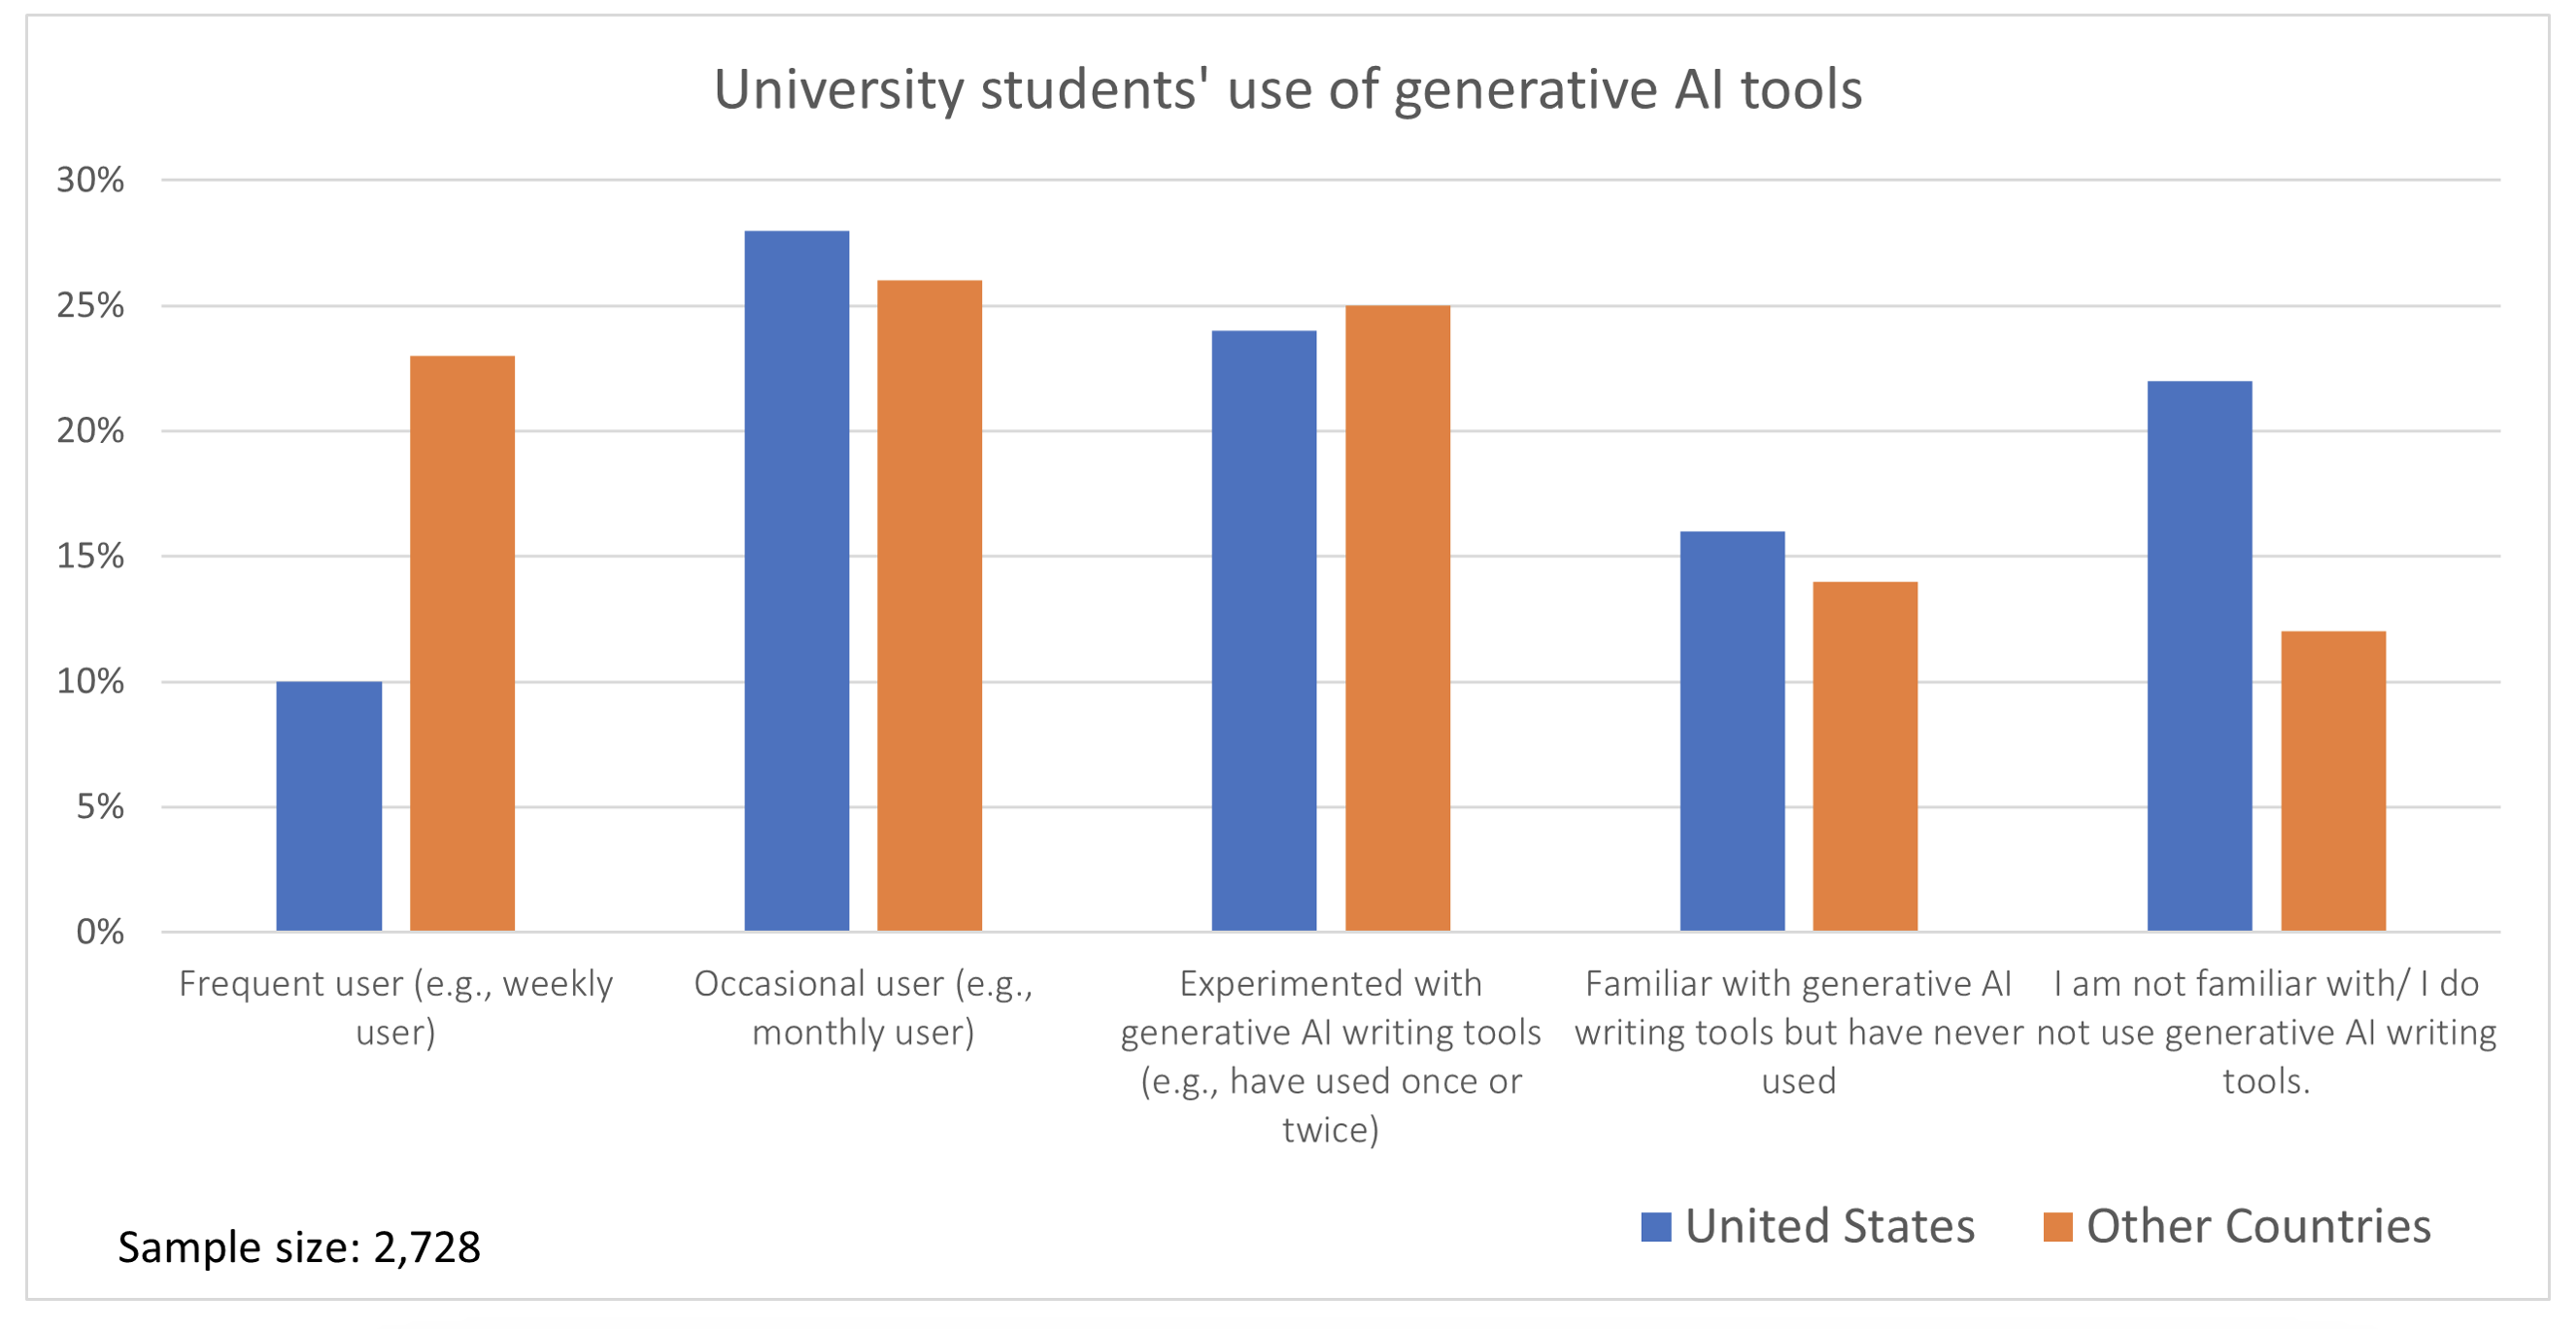 Graph showing University students' use of generative AI tools